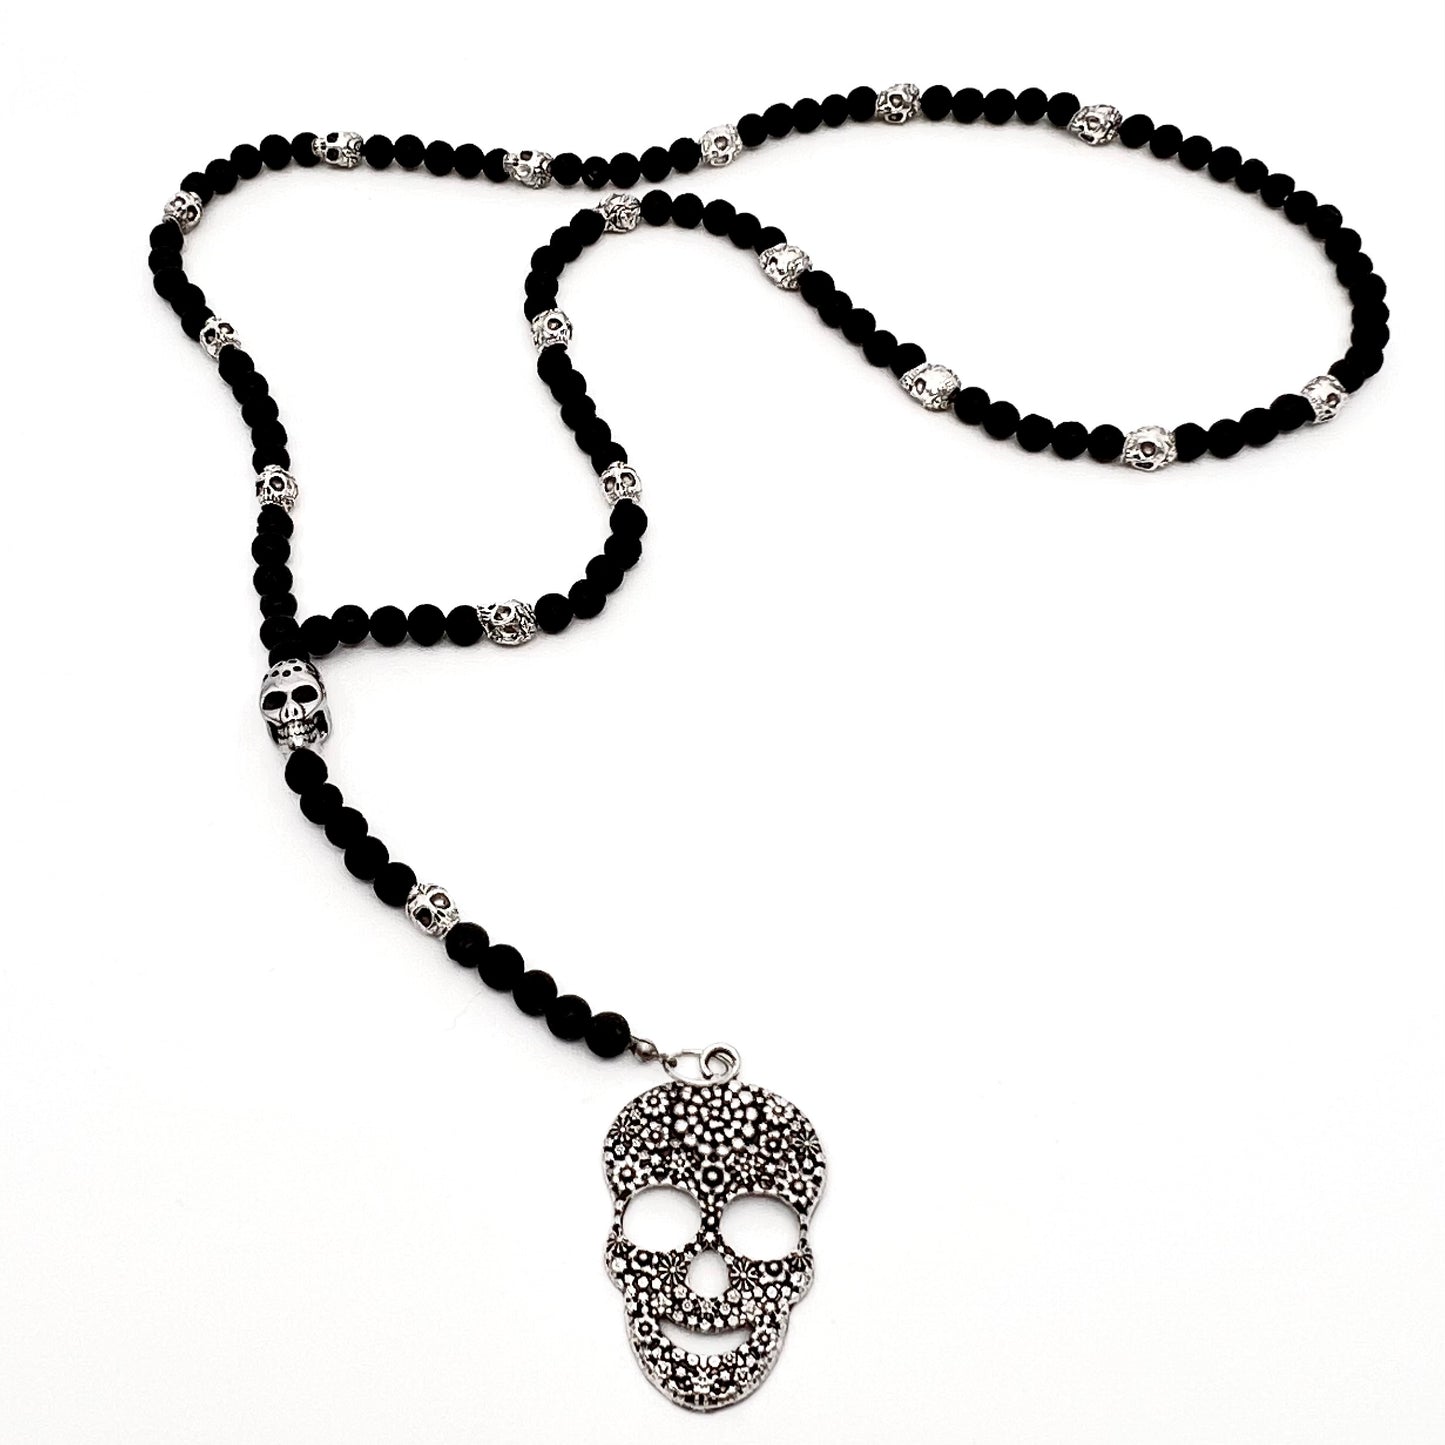 Necklace with skulls